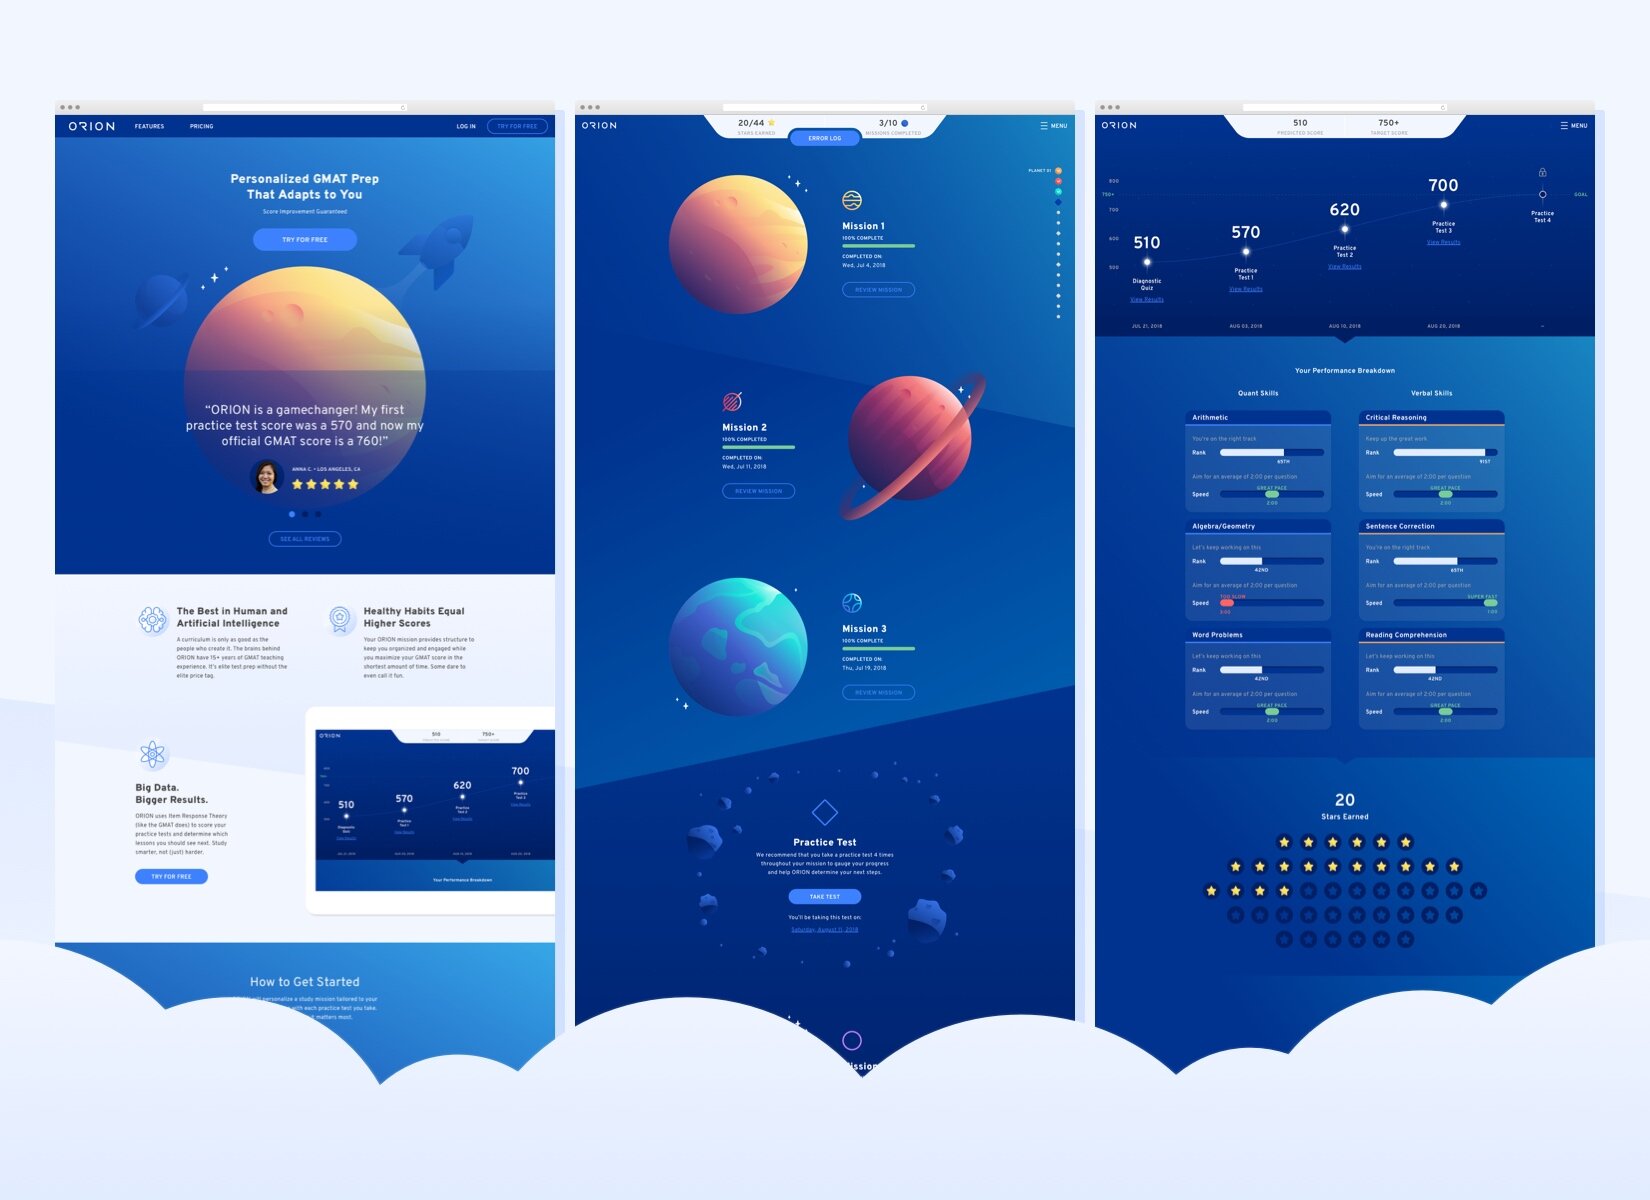 (L-R) Version 2.0 Landing Page, Study Mission Page, Stats Page